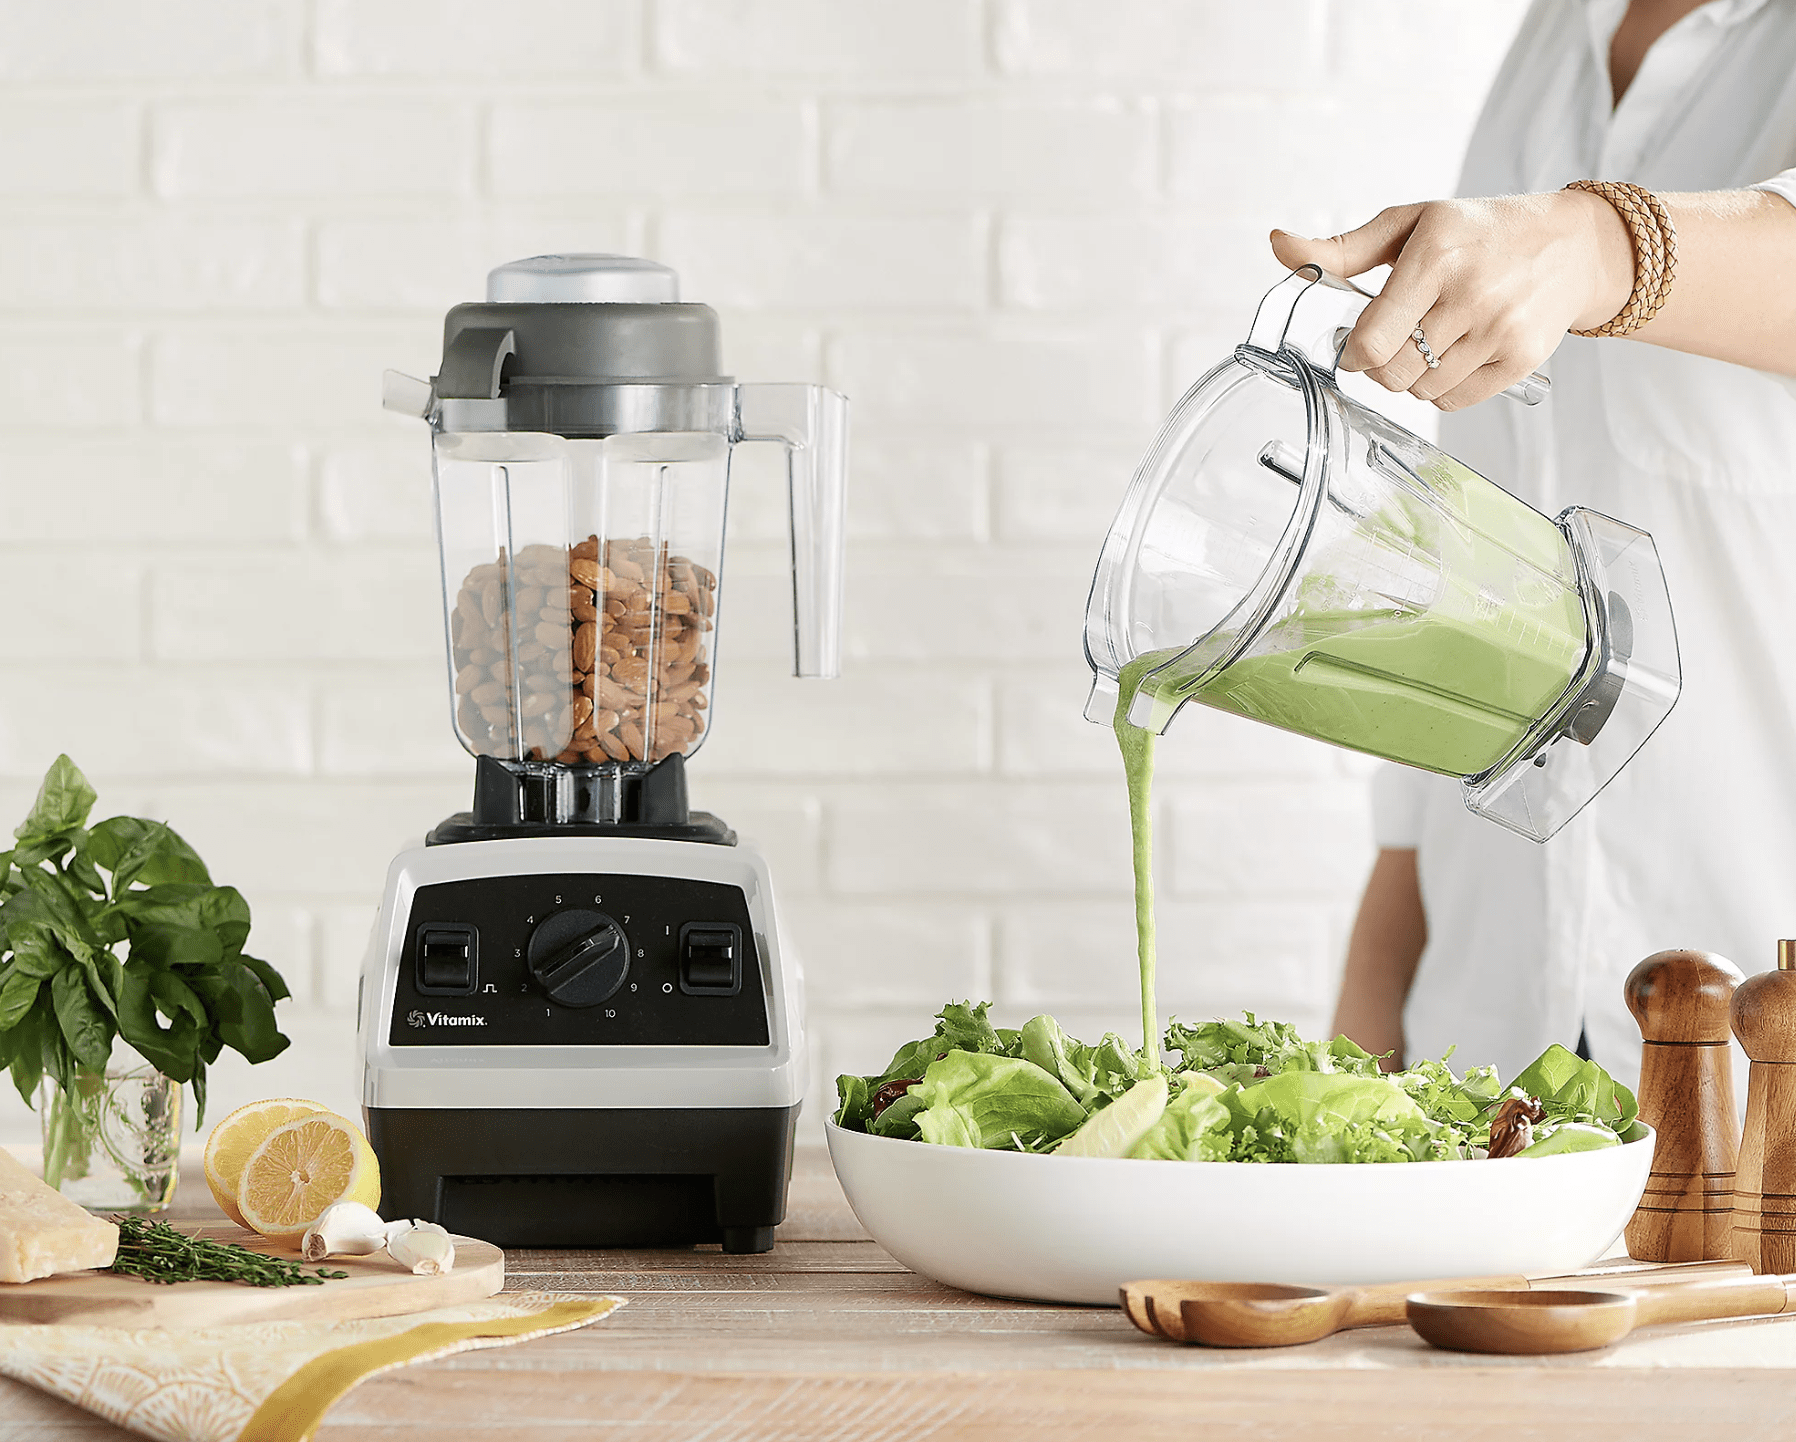 Vitamix Explorian Blender Sale: Save $200 When You Buy It at QVC